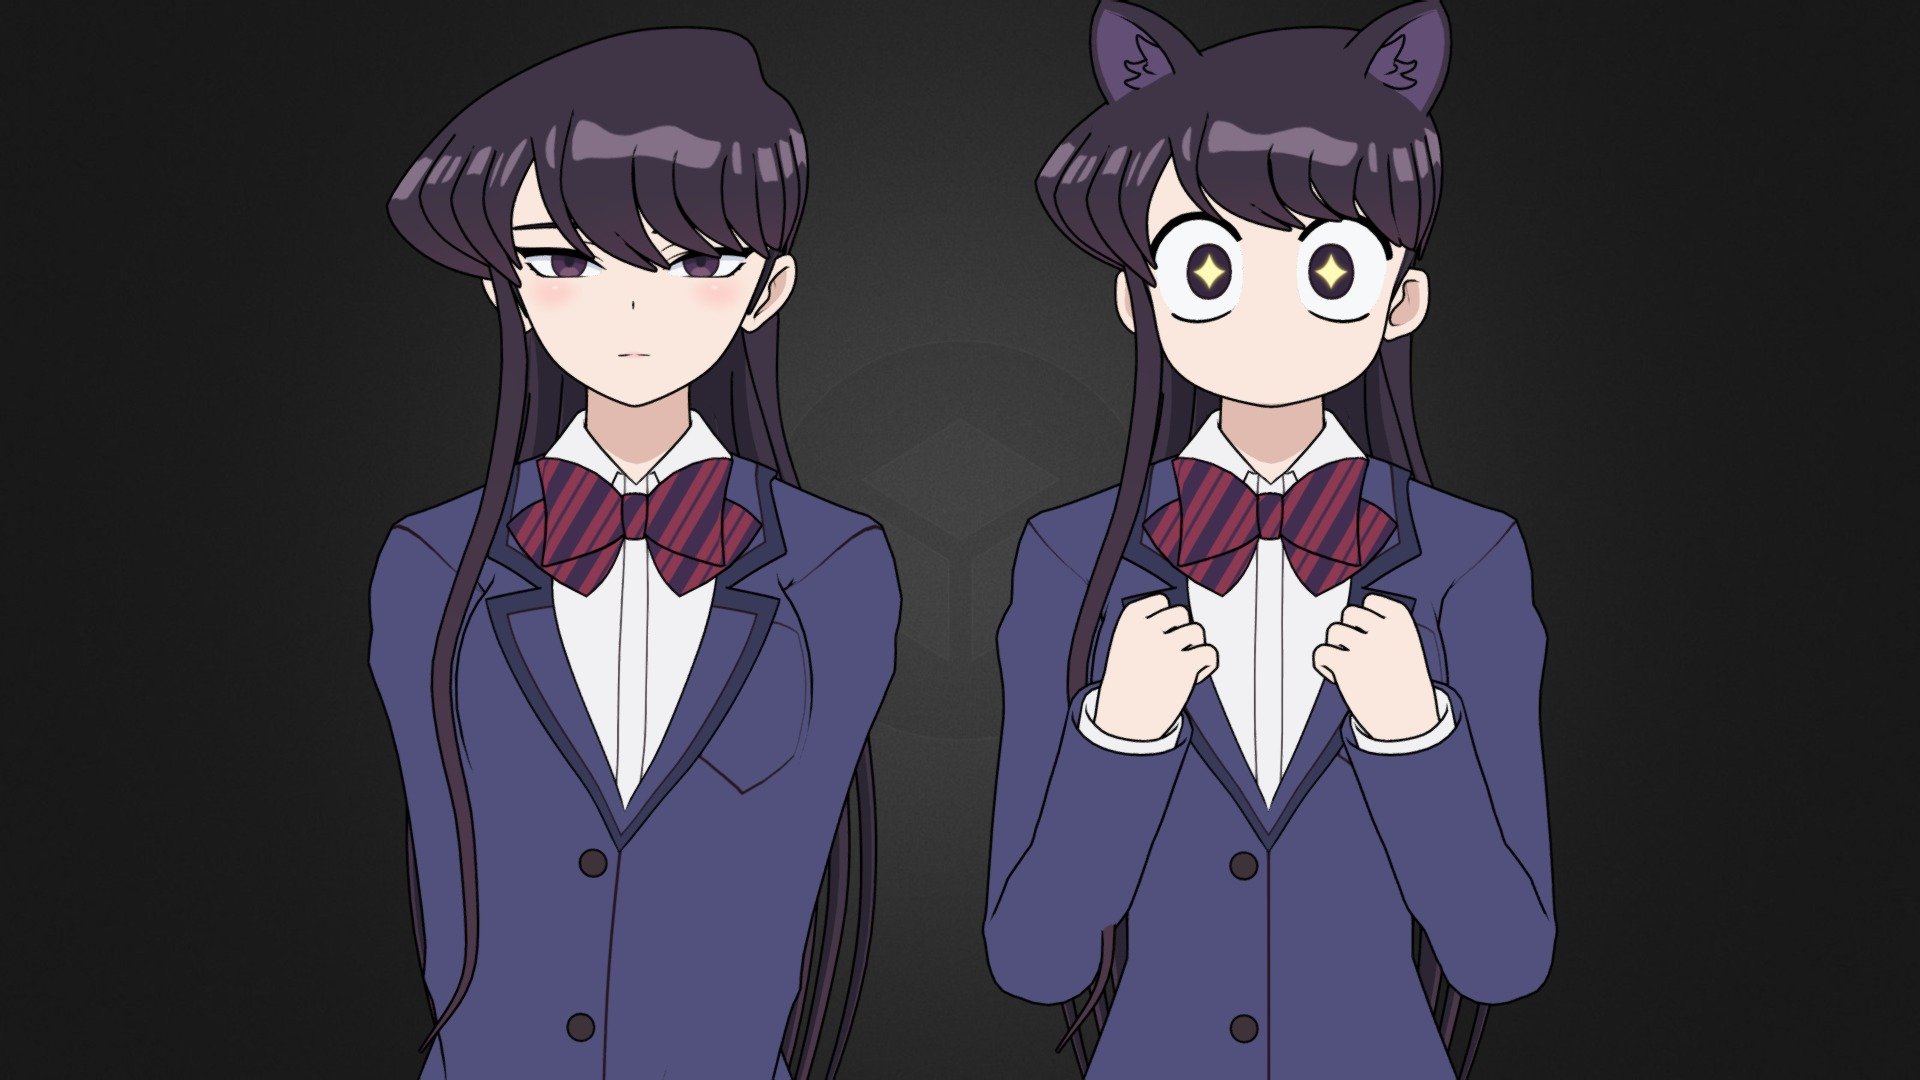 Komi Shouko character from the anime Komi Can't Communicate.

3D Model Rigged. With Shape Keys. In blend format, for Blender v2.8 - v3.1. EEVEE renderer, with nodes, material Toon Shader.

▬▬▬▬▬▬▬▬▬▬▬▬▬▬▬▬▬▬▬▬▬▬▬▬▬▬▬▬▬▬▬▬▬▬▬▬▬▬▬▬▬▬▬▬▬▬

Buy Artstation: https://www.artstation.com/a/15254439

Buy CGTrader: encurtador.com.br/eAK26

▬▬▬▬▬▬▬▬▬▬▬▬▬▬▬▬▬▬▬▬▬▬▬▬▬▬▬▬▬▬▬▬▬▬▬▬▬▬▬▬▬▬▬▬▬▬

Contents of the .ZIP file:

● Folder with all textures in .tga Format.

● .blend file with the complete 3D Model.

Contents of the .blend file:

● Full body, no deleted parts.

● Individual Hair, separated from the body.

● Pieces of Clothing, separated from the body. (Individuals, Can be removed (except the socks))

● Complete RIG, with all bones for movement. (Metarig Rigify Armature)

● Shape Keys.

● Materials configured with nodes.

● UV mapping.

● Textures embedded in the .blend file.

● Modifiers. (Subdivide, Solidify and Outline for contours) - Komi Shouko - 3D Model Blender - 3D model by Gilson.Animes 3d model